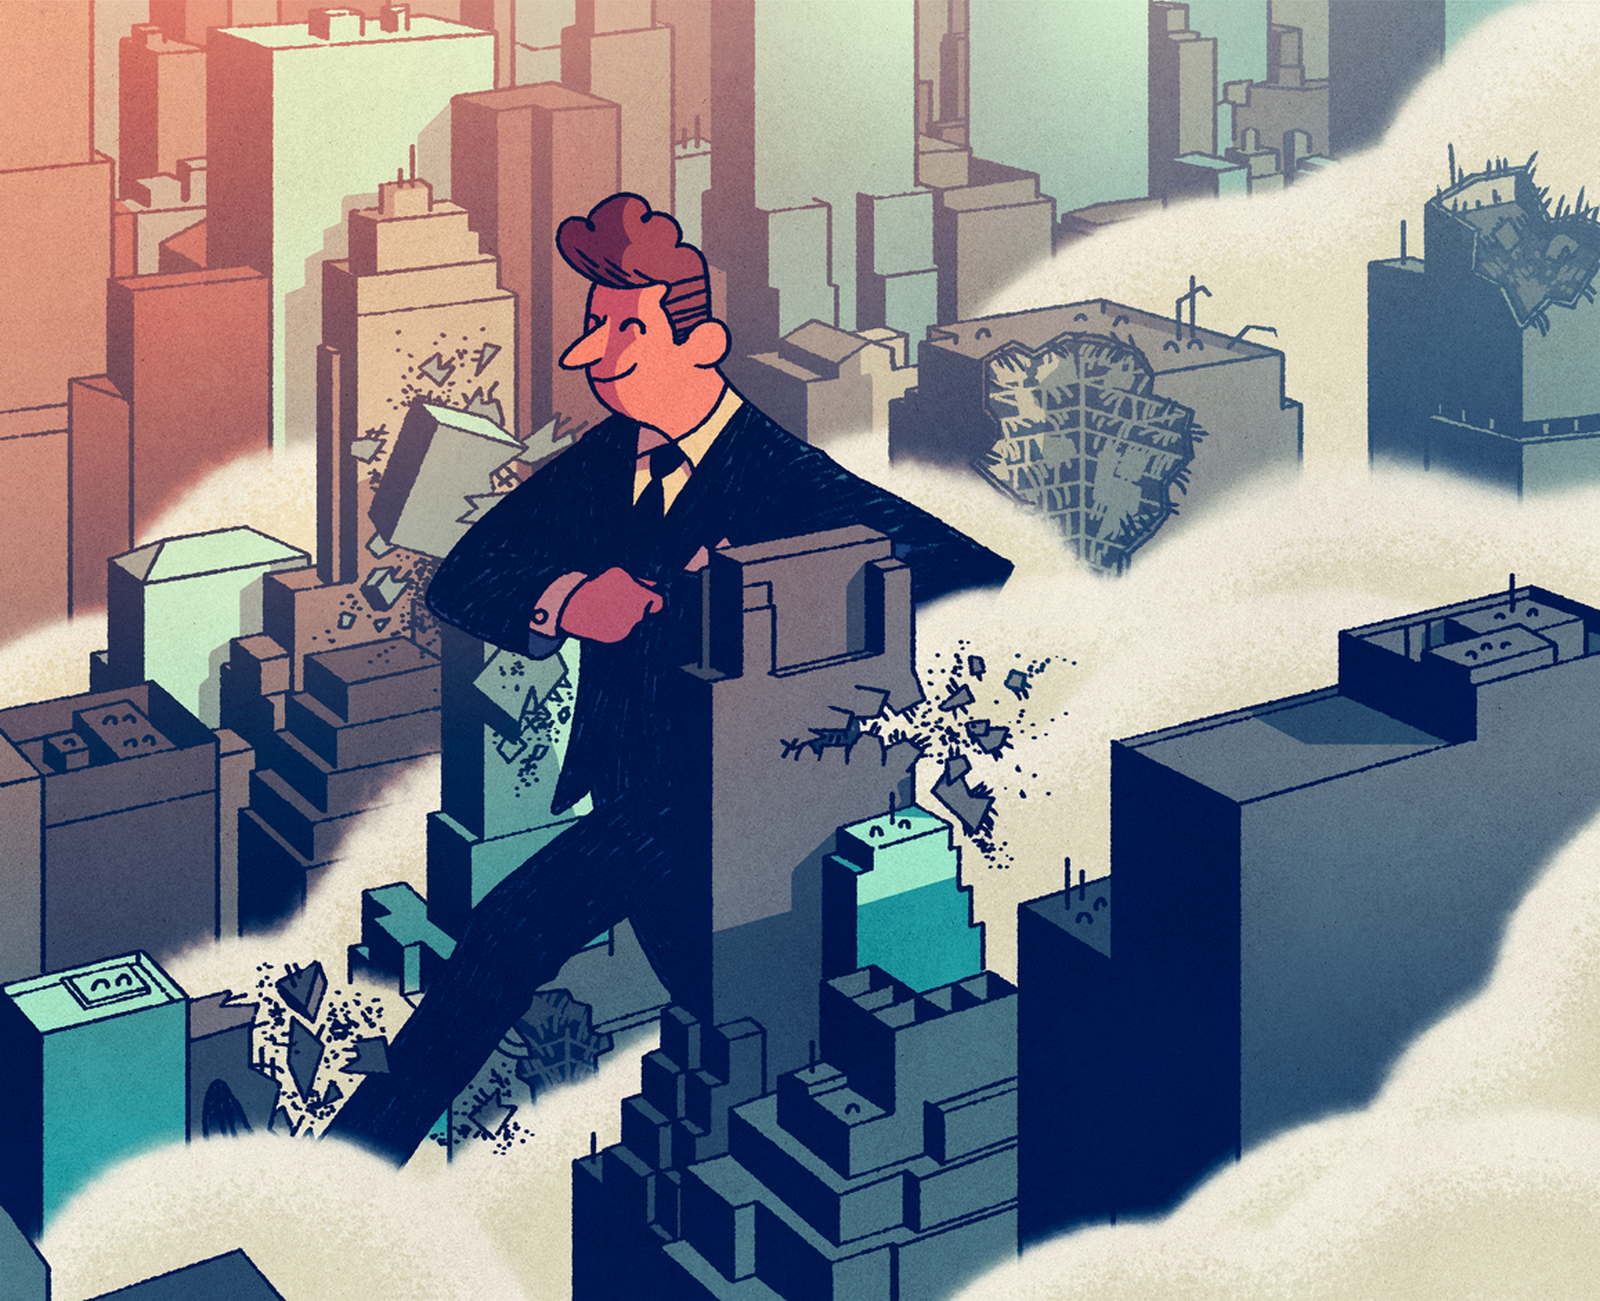 A businessman with unethical amnesia stomps through a city.